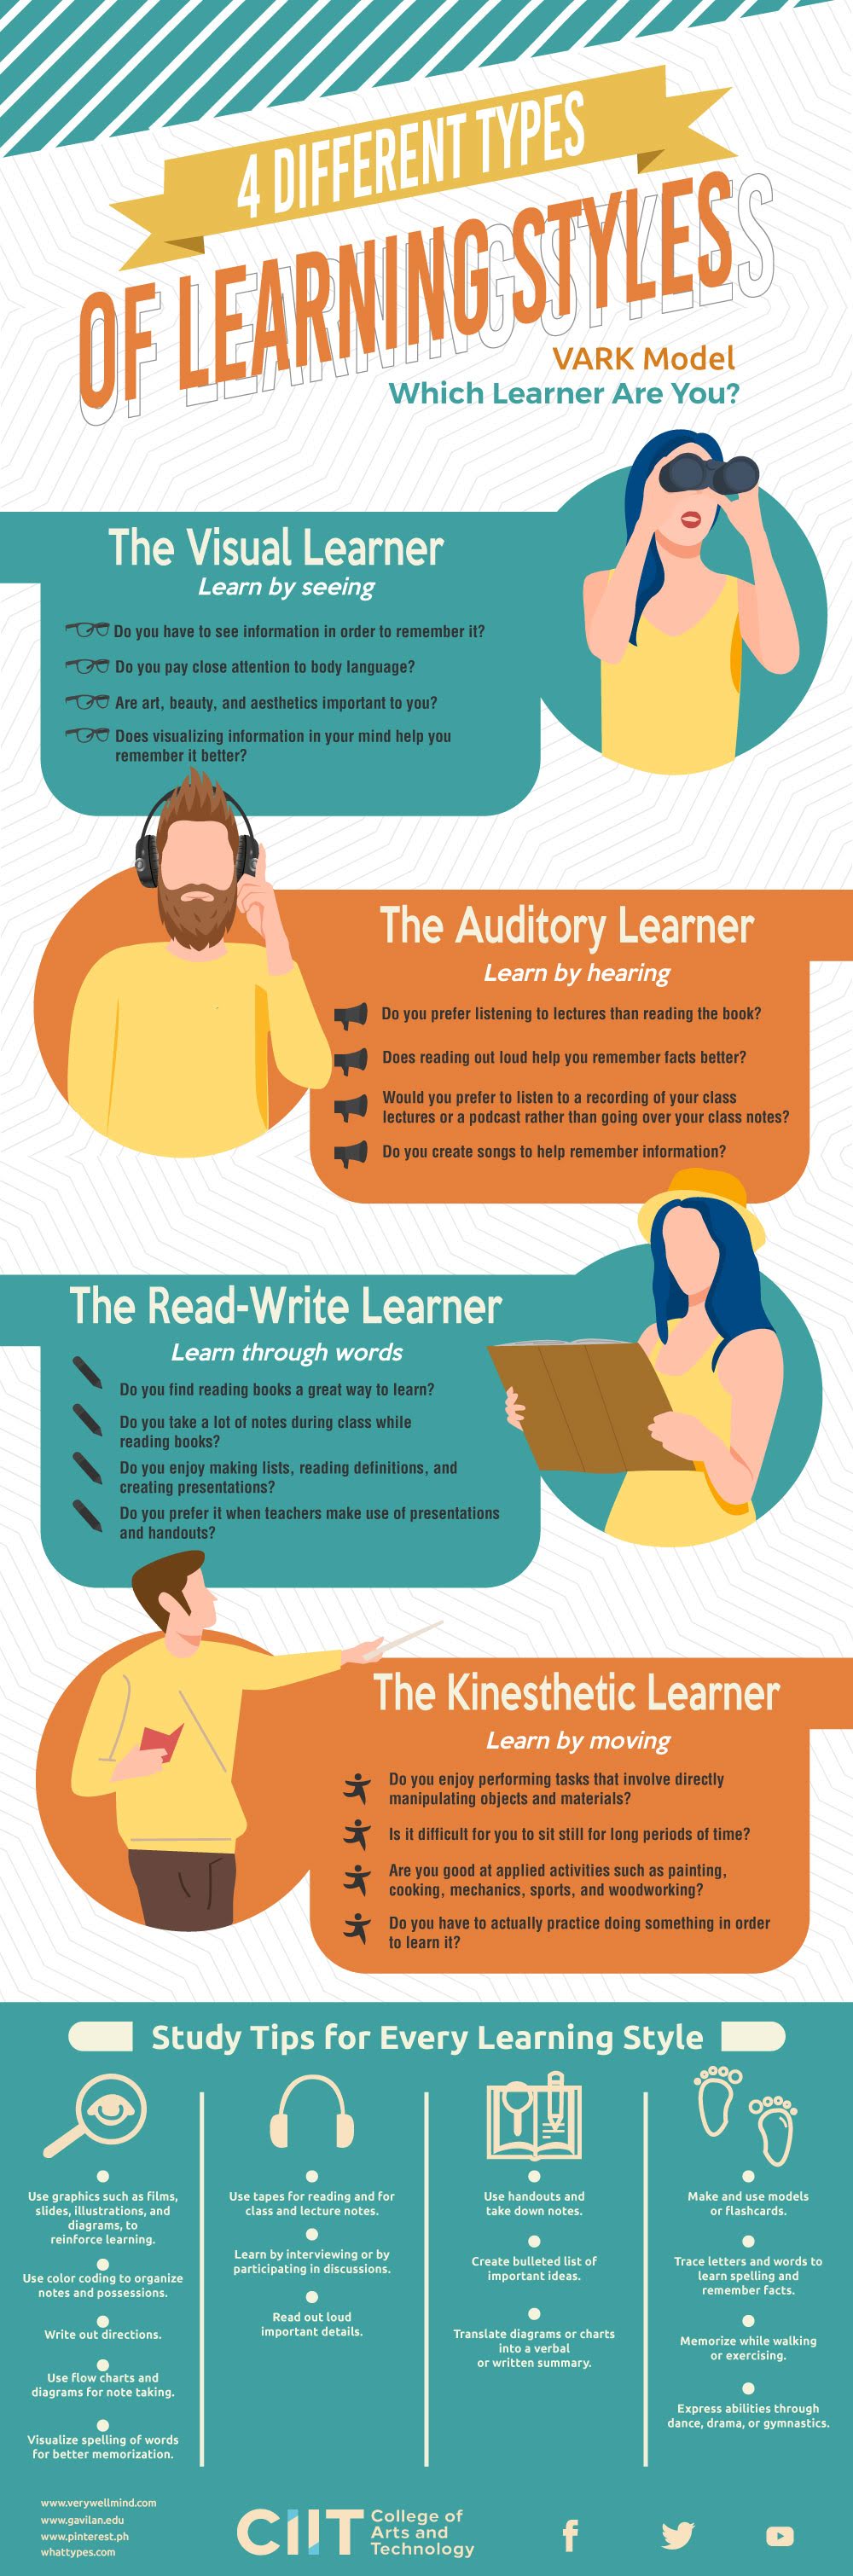 How to Survive High School Life Based on Different Types of Learning Styles #infographic